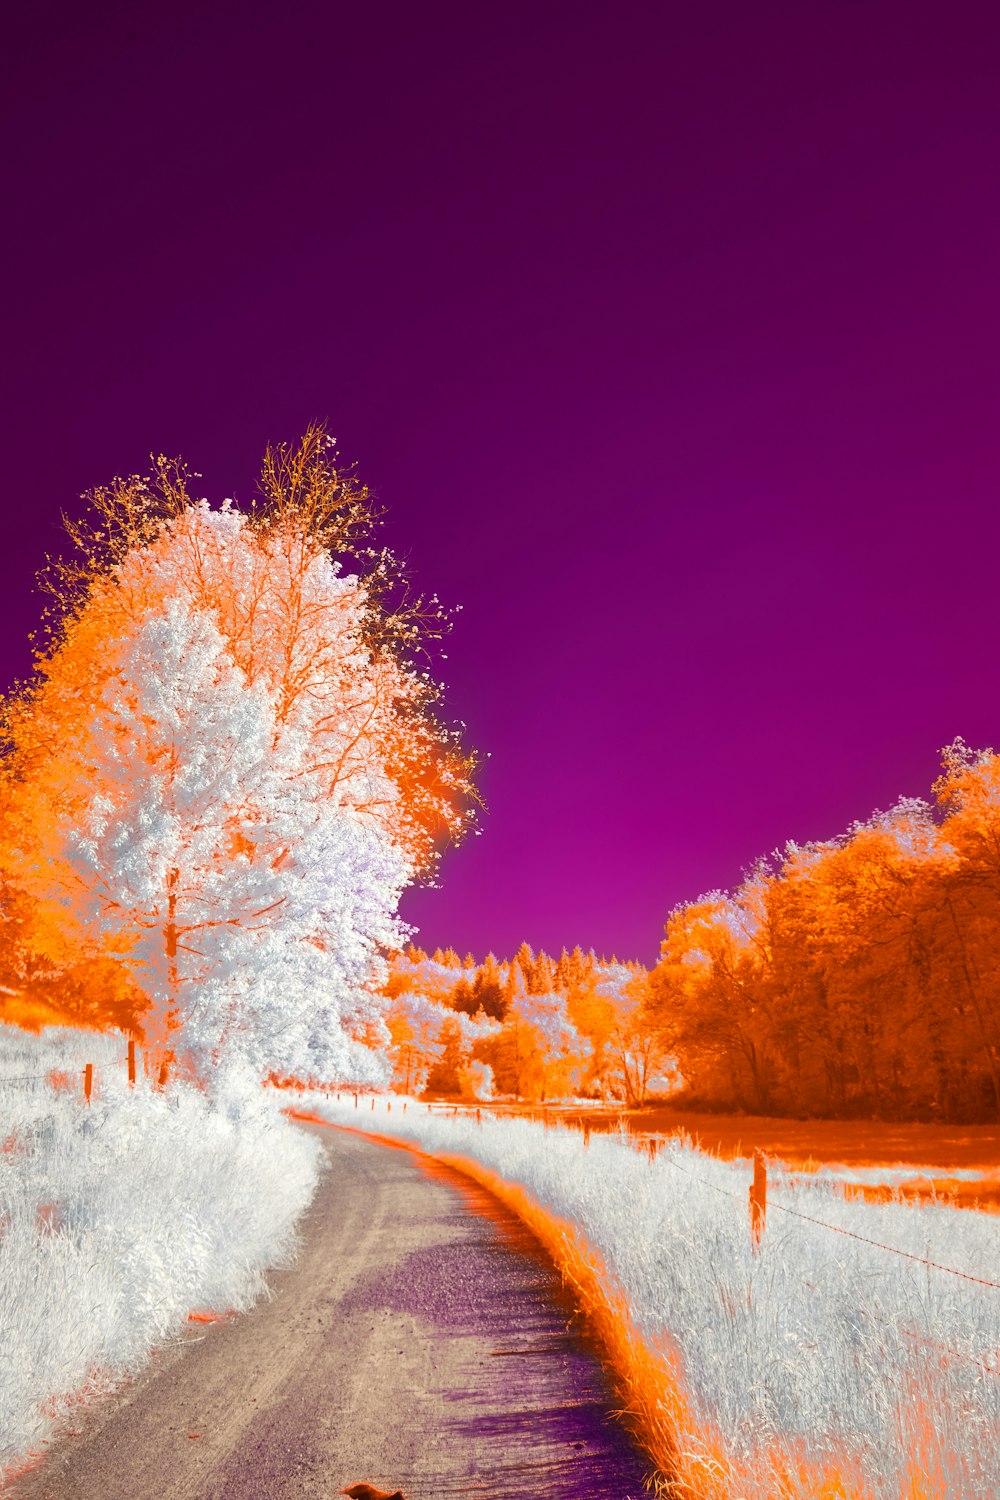 an infrared image of a road and a tree